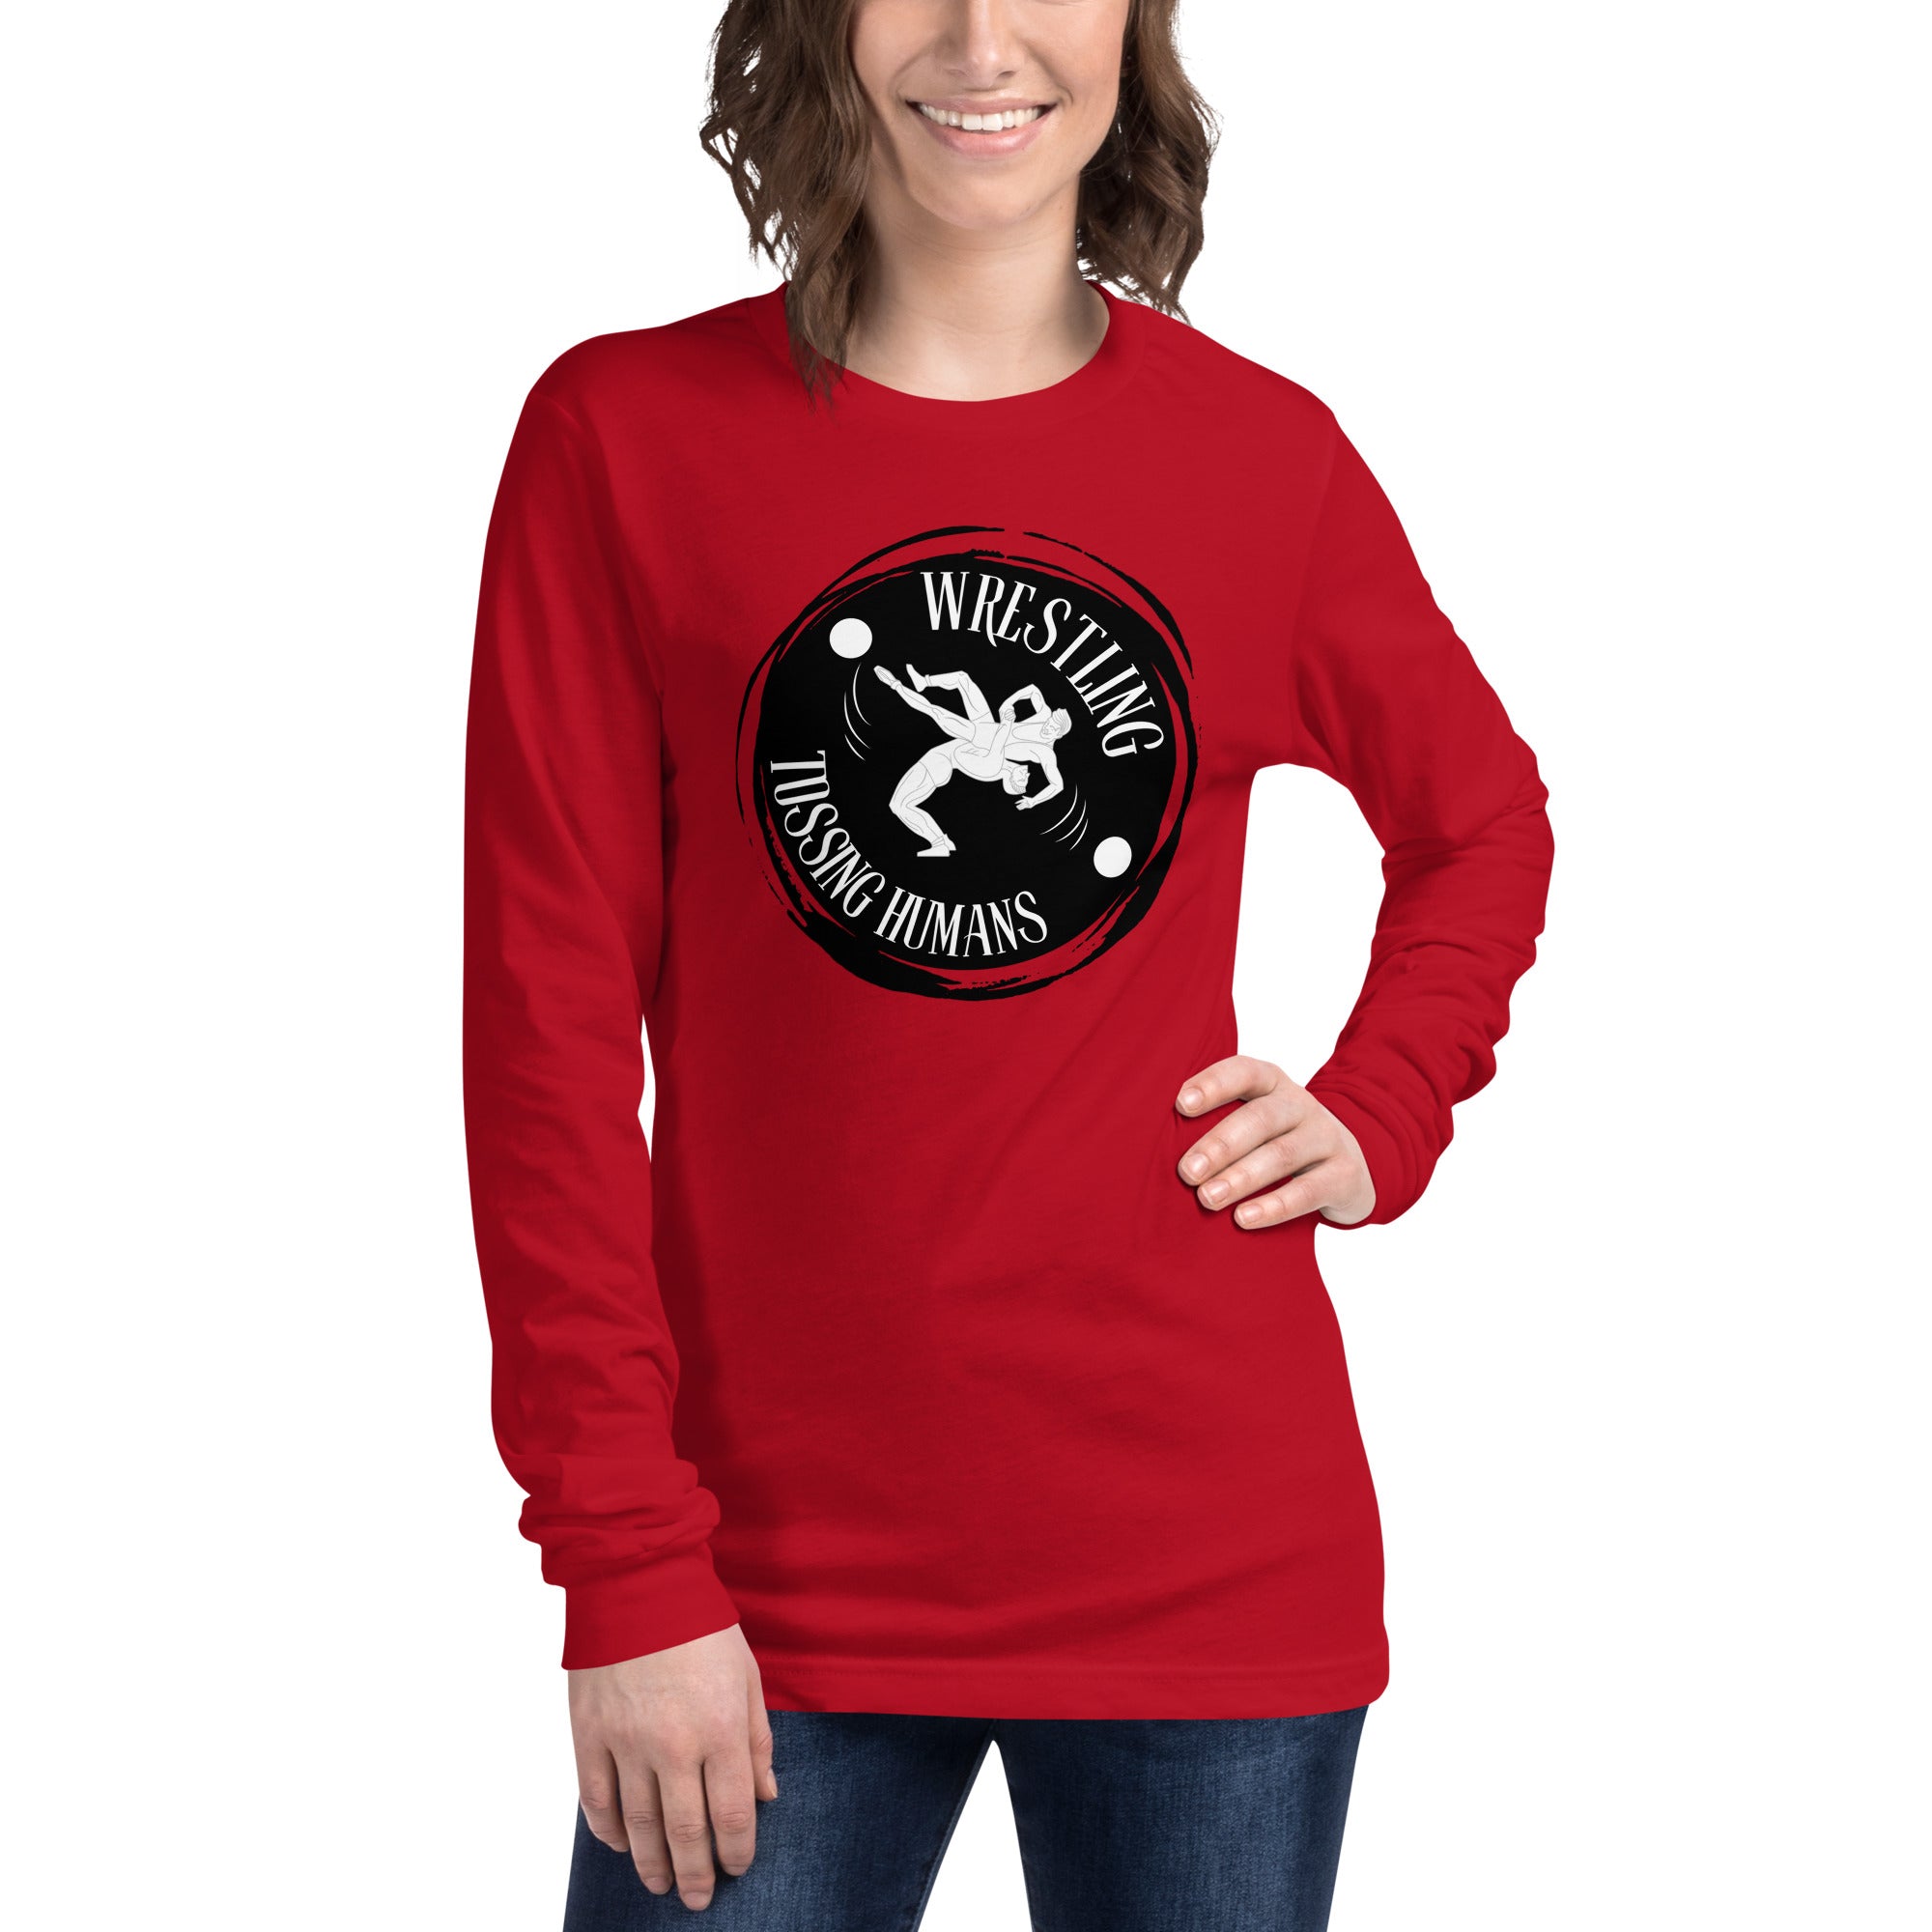 Wrestling Tossing Humans Women's Select Long Sleeve